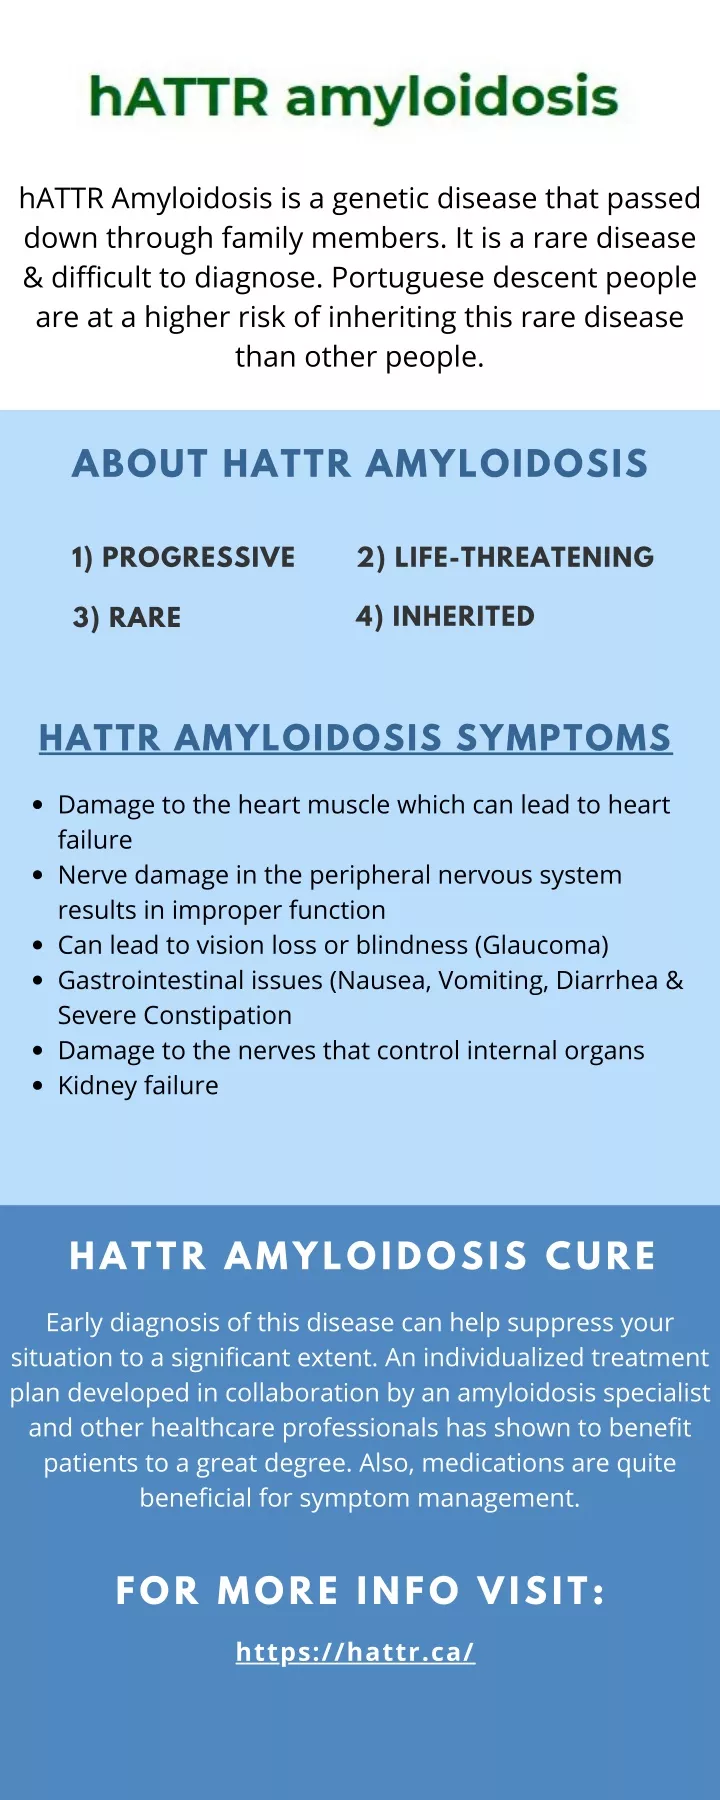 hattr amyloidosis is a genetic disease that